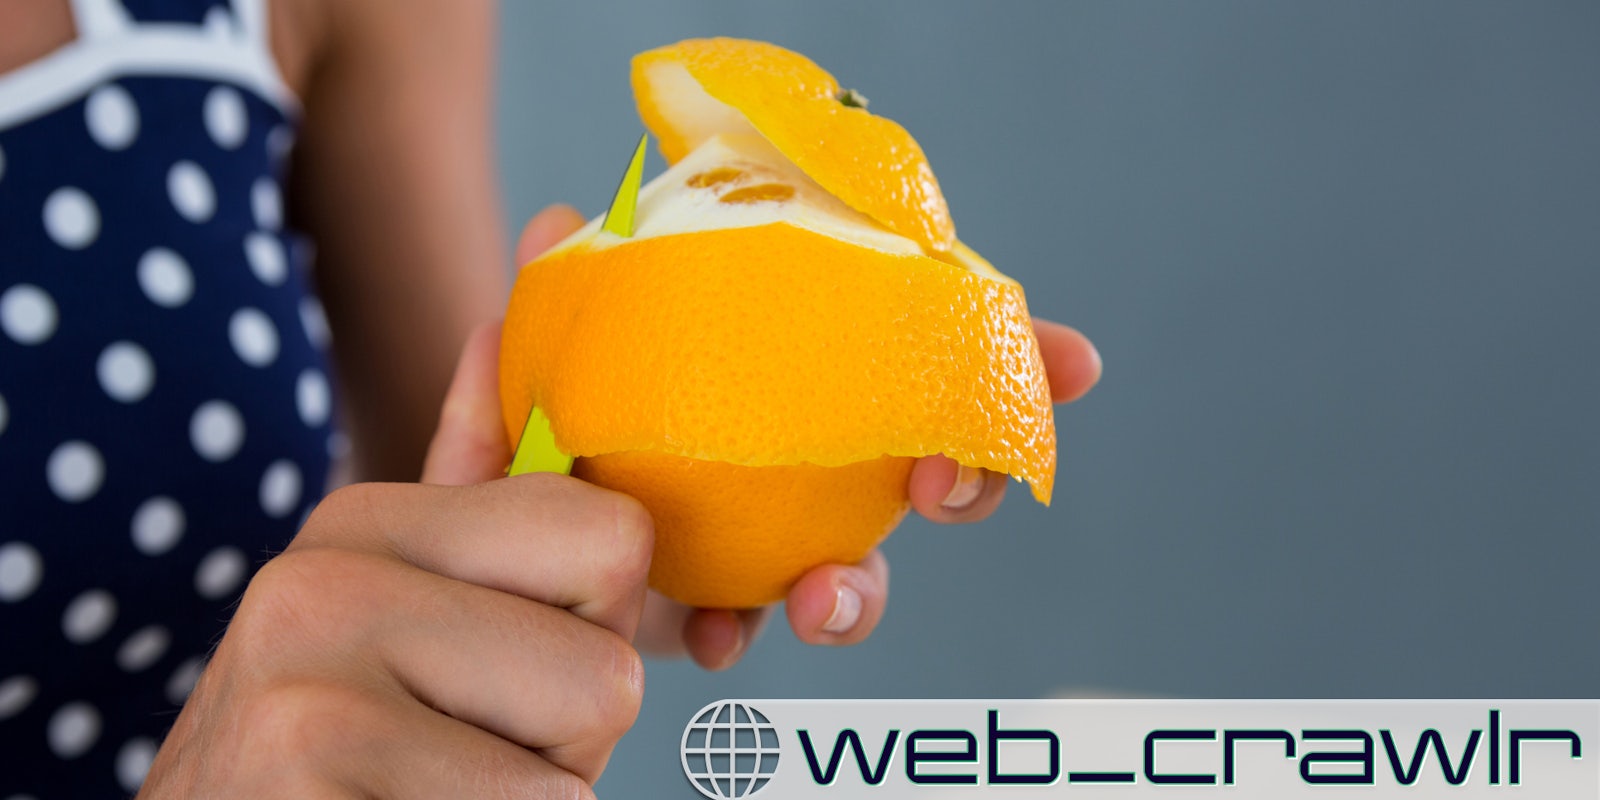 A person peeling an orange. The Daily Dot newsletter web_crawlr logo is in the bottom right corner.